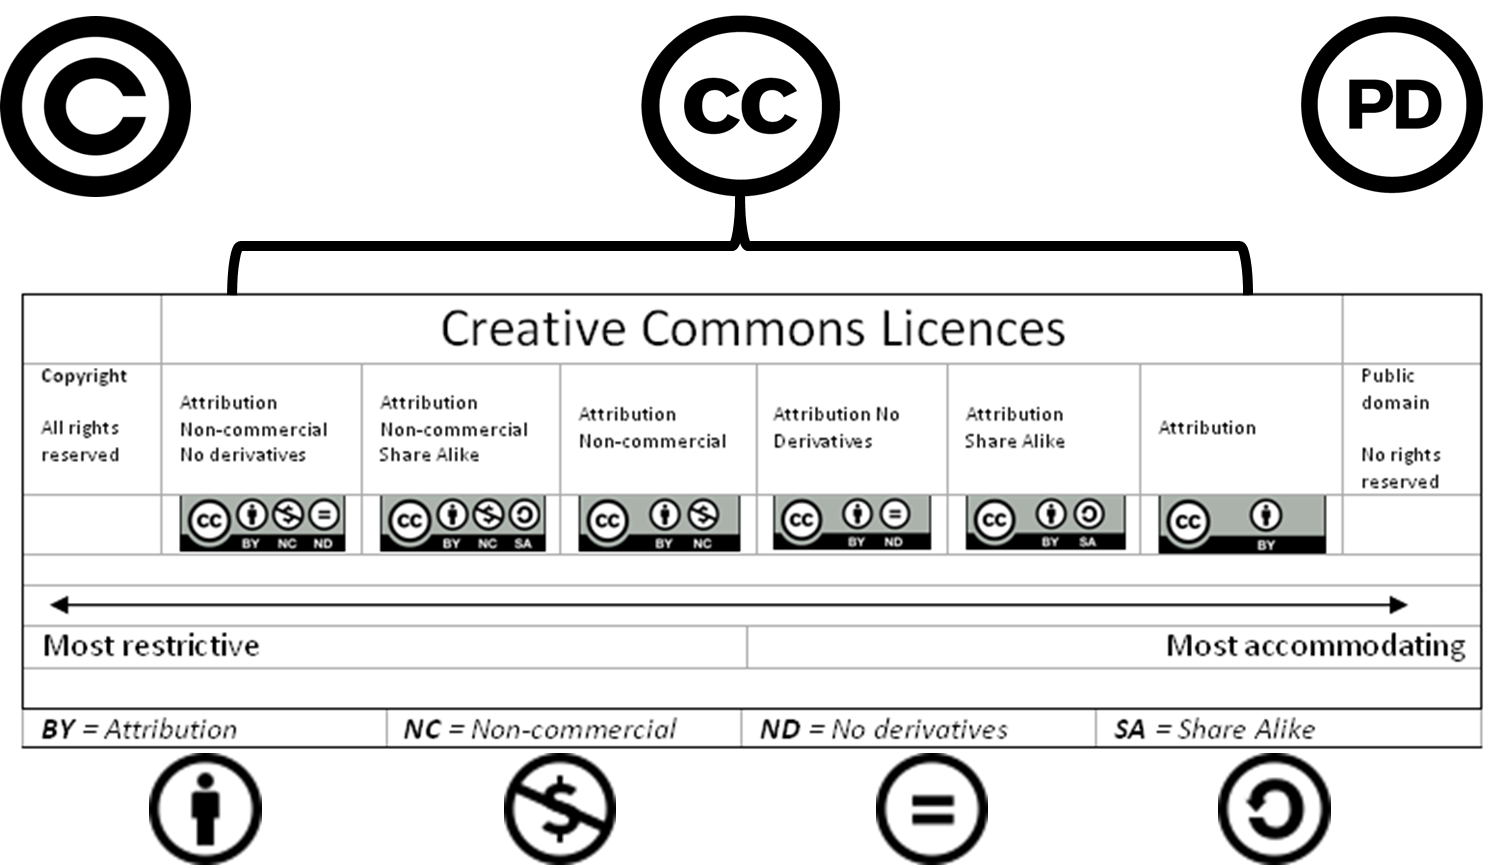 Open Education - Creative Commons